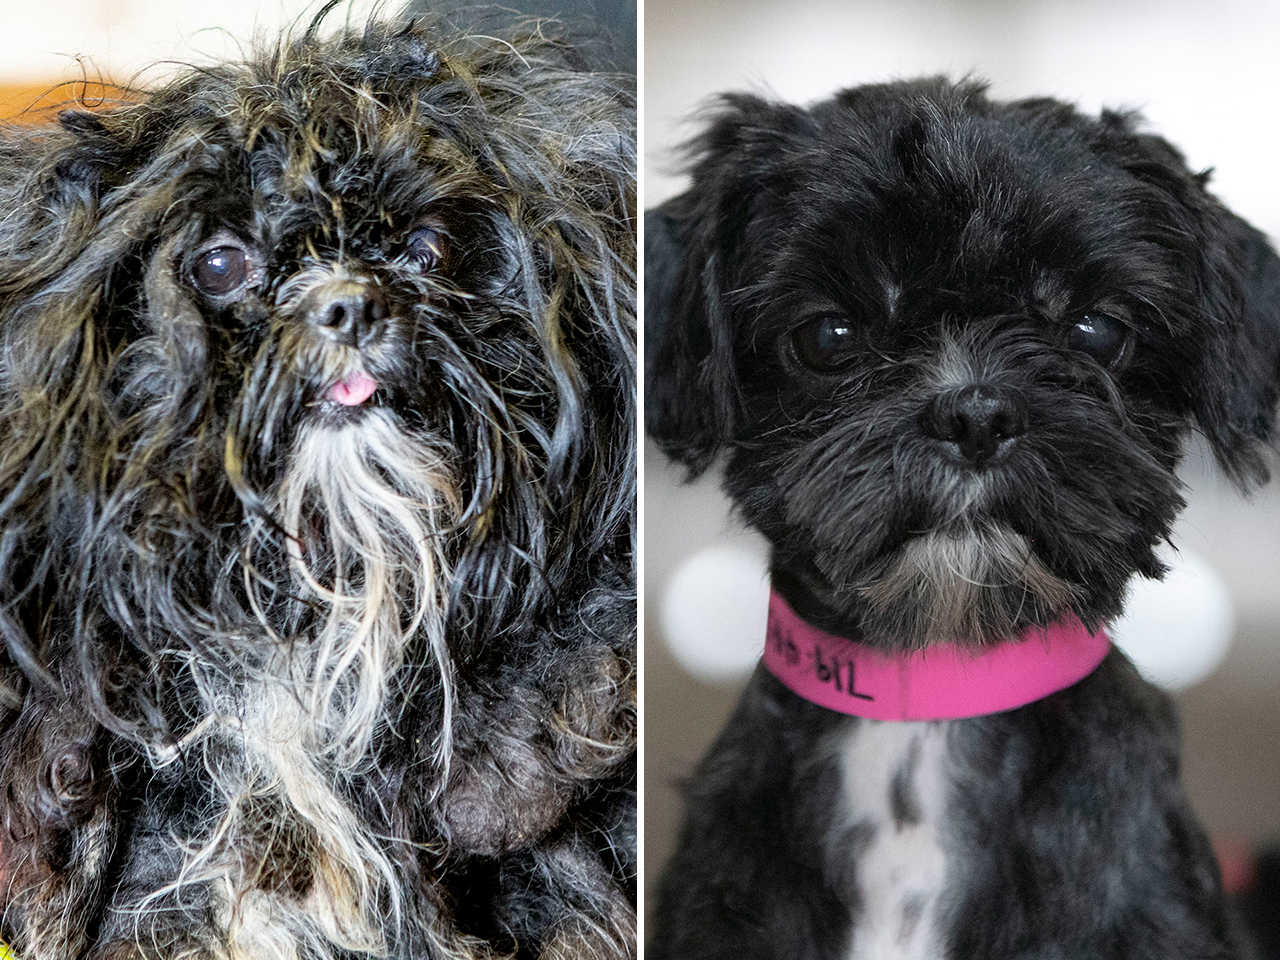 Luna was rescued from a puppy mill. She was covered in mats and sores from years of neglect. After her grooming, a beauty queen emerged, and now she’s brightening the lives of her new family.